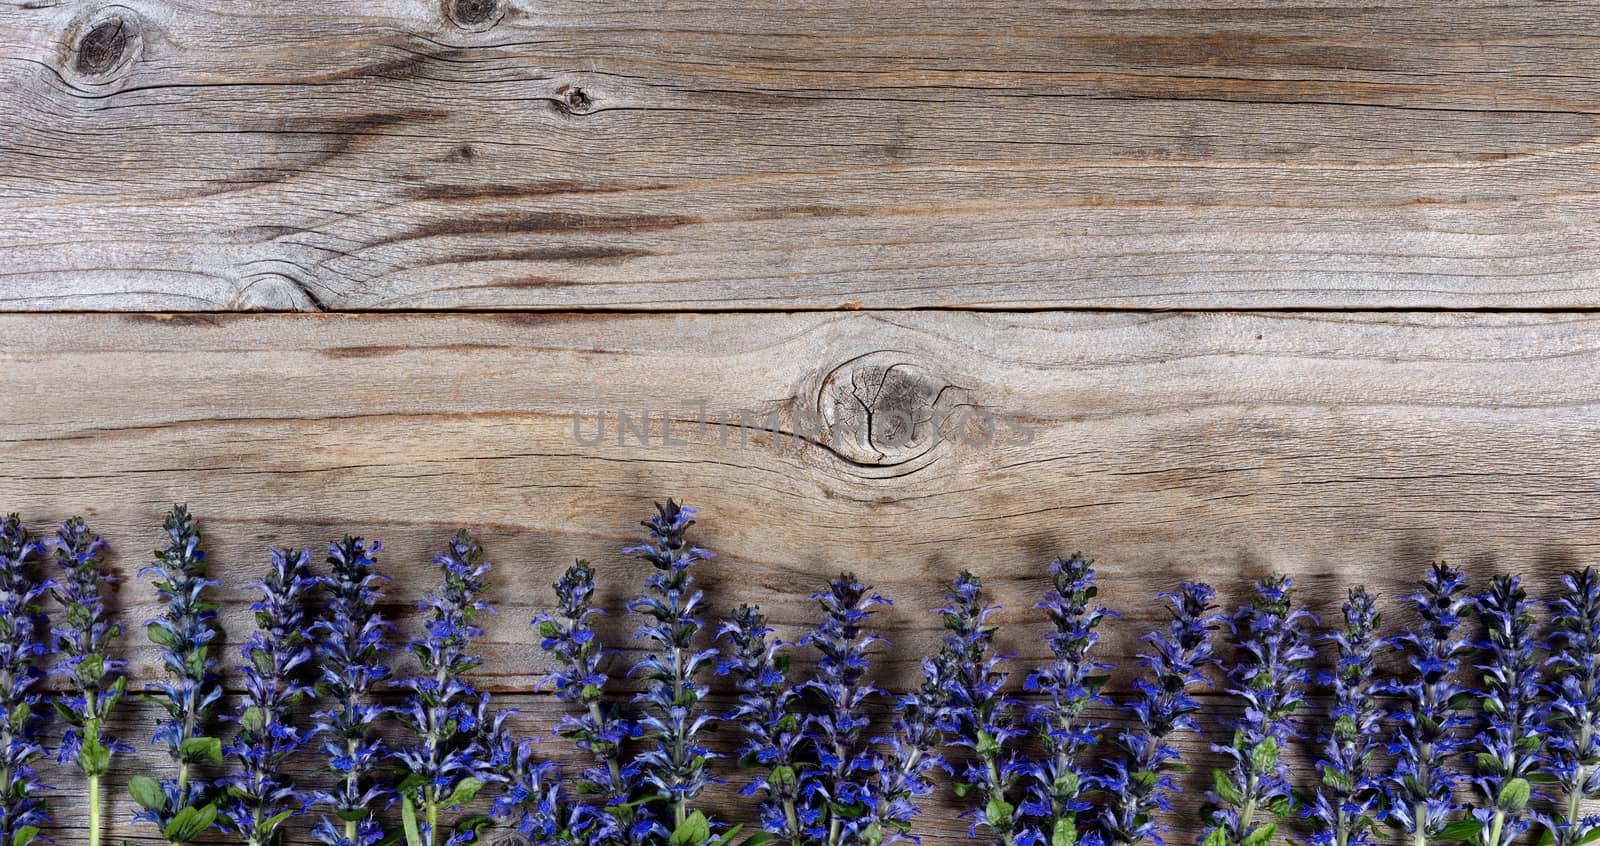 Wild purple spring flowers forming bottom border on rustic wood. Flat lay view with copy space available. 